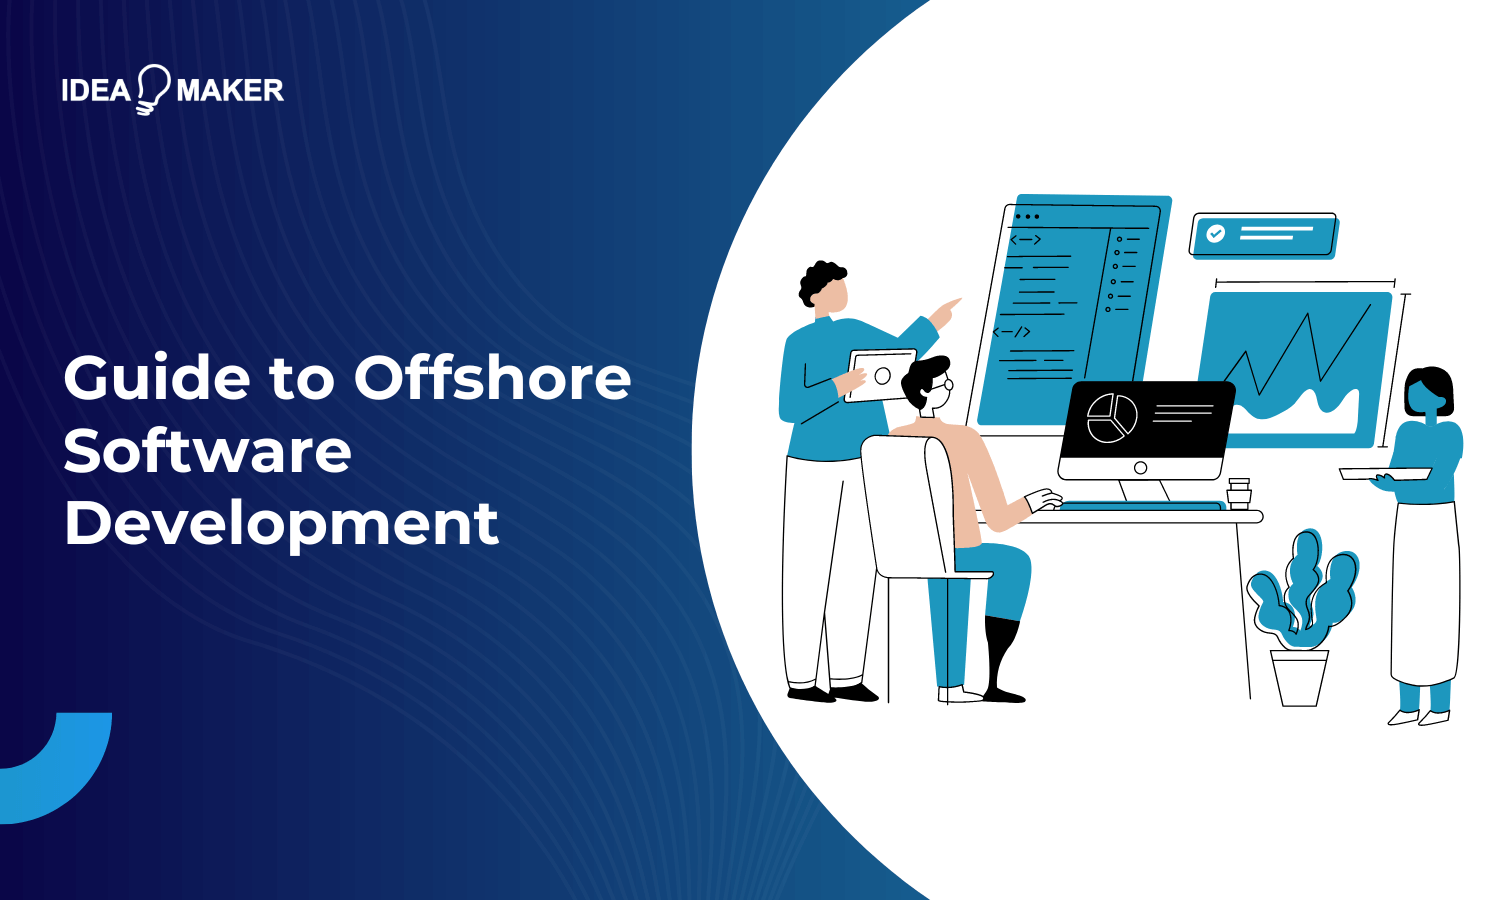 Guide to Offshore Software Development